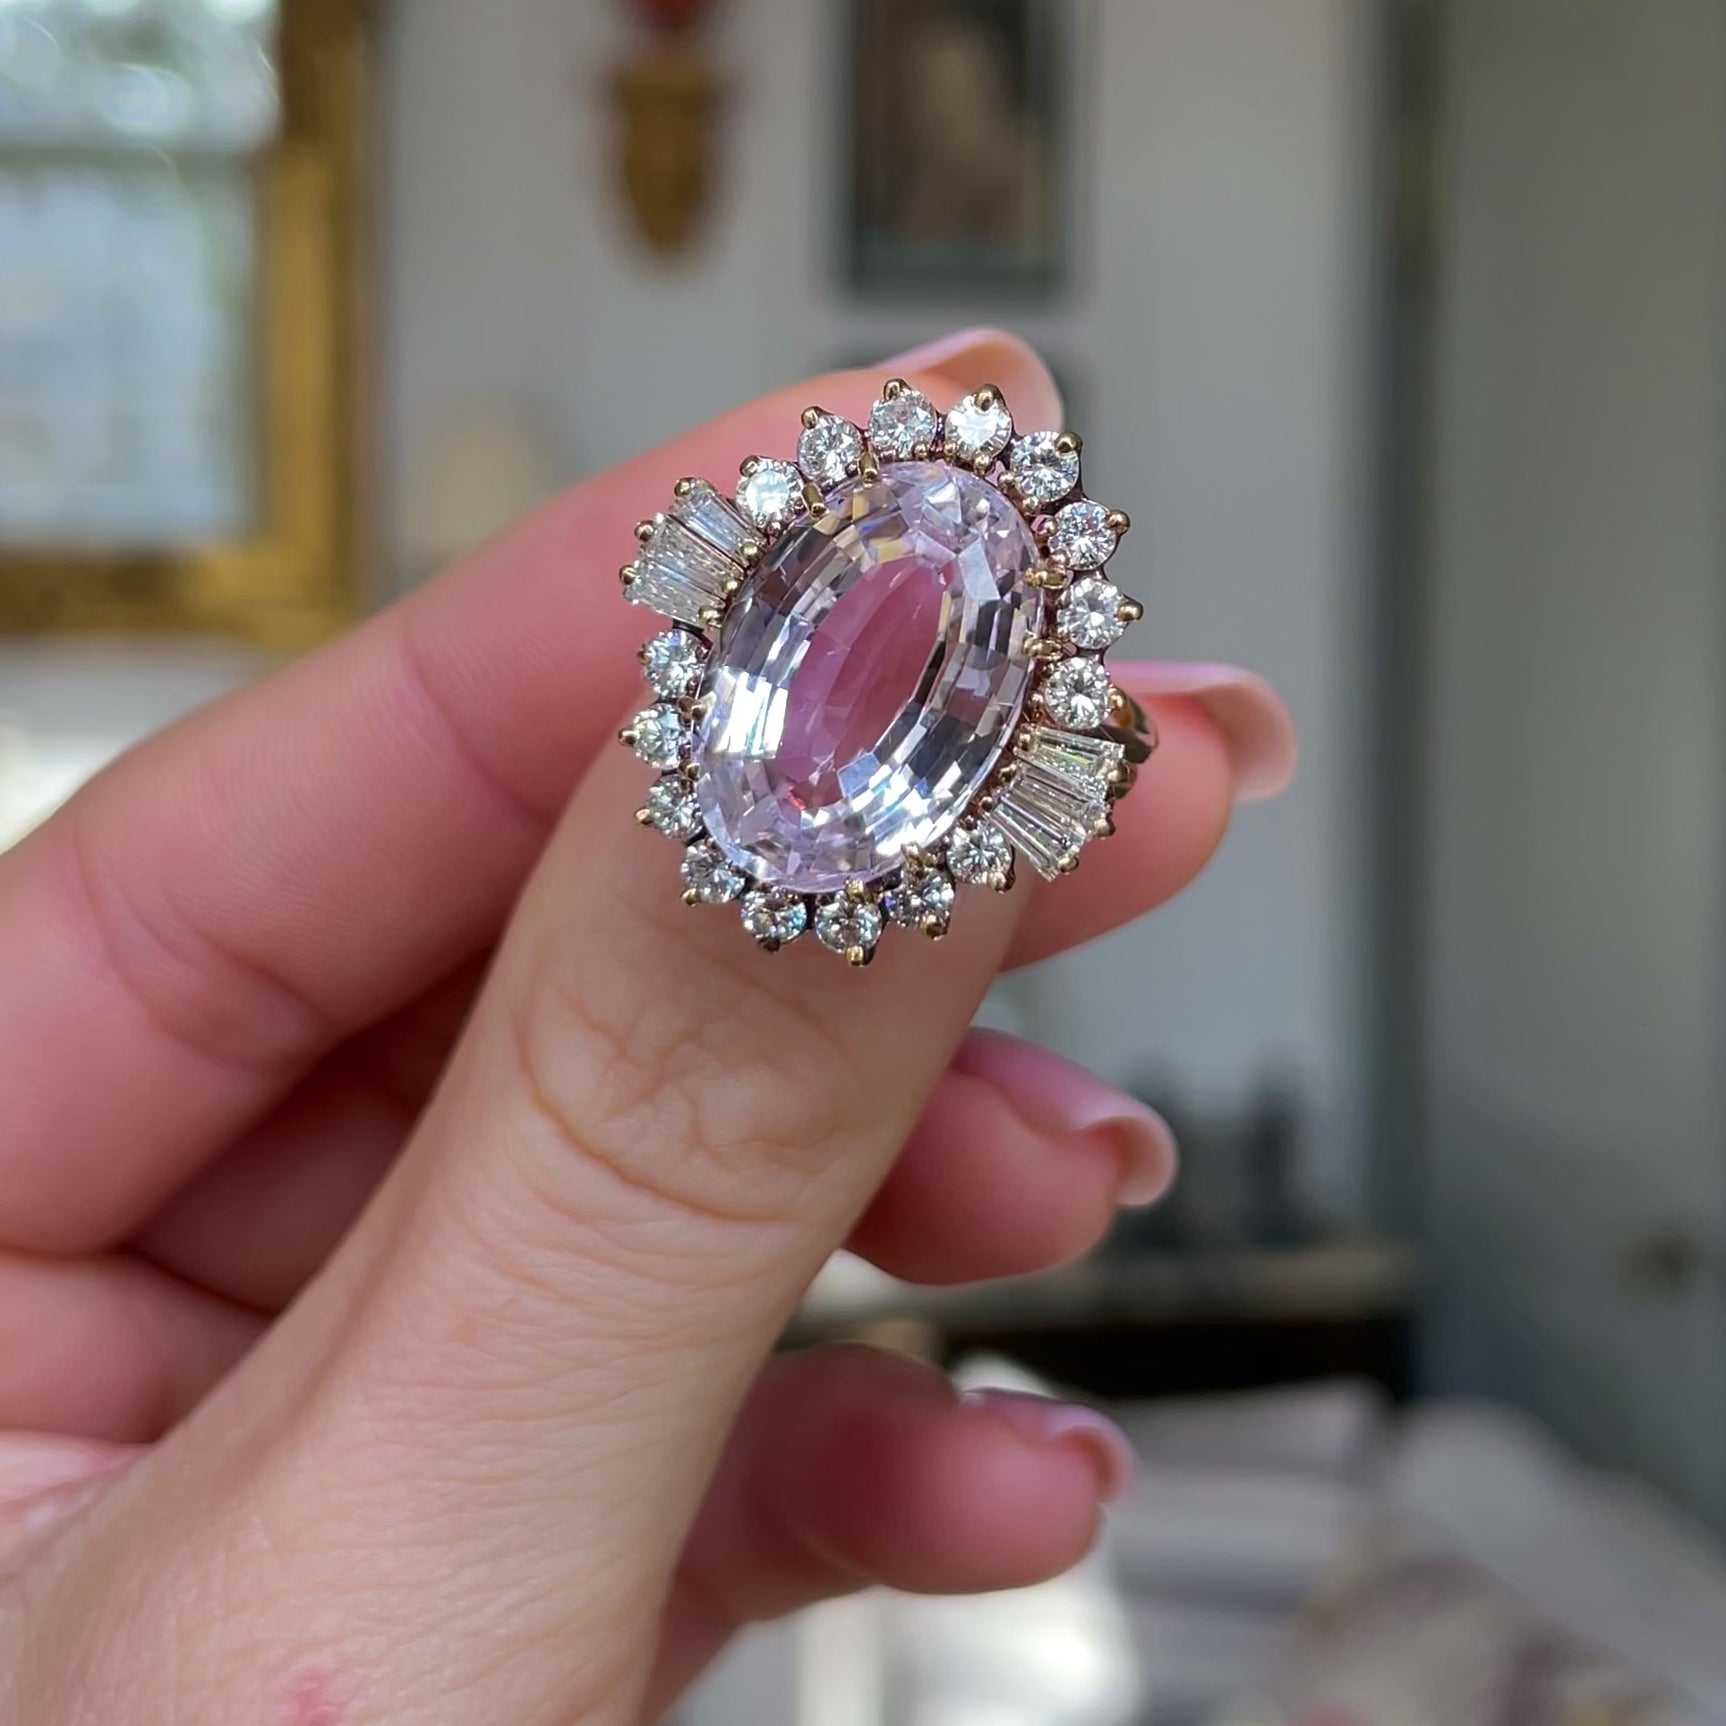 Morganite and diamond cluster cocktail ring, held in fingers and moved around to give perspctive 